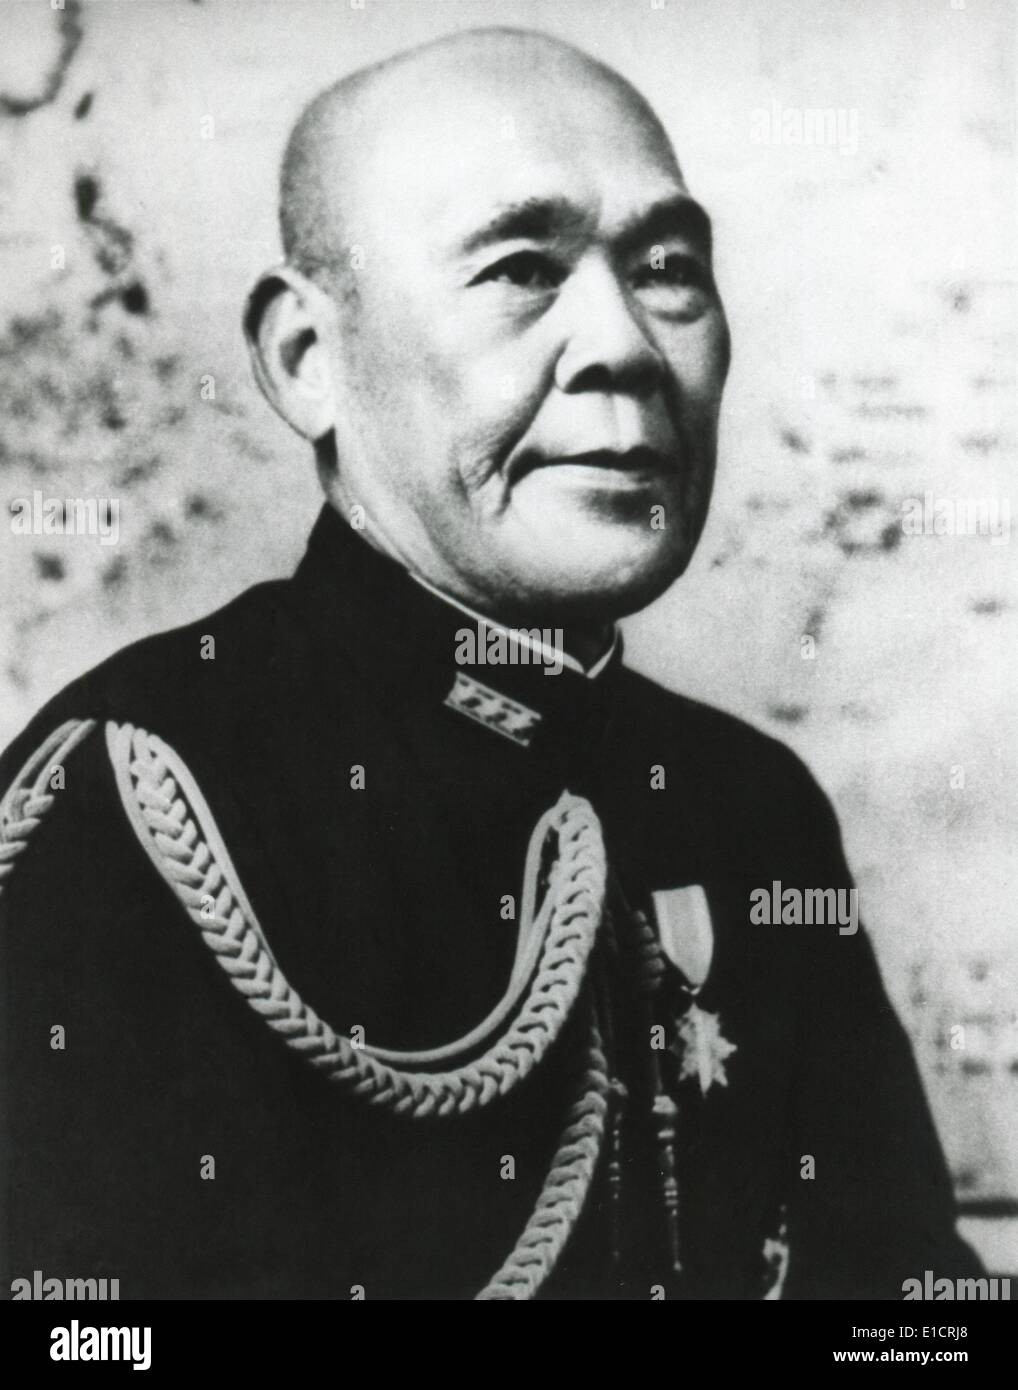 Admiral Osami Nagano, Japanese Chief of Naval General Staff. He planned and ordered the attack on Pearl Harbor, Dec. 7, 1941. Stock Photo